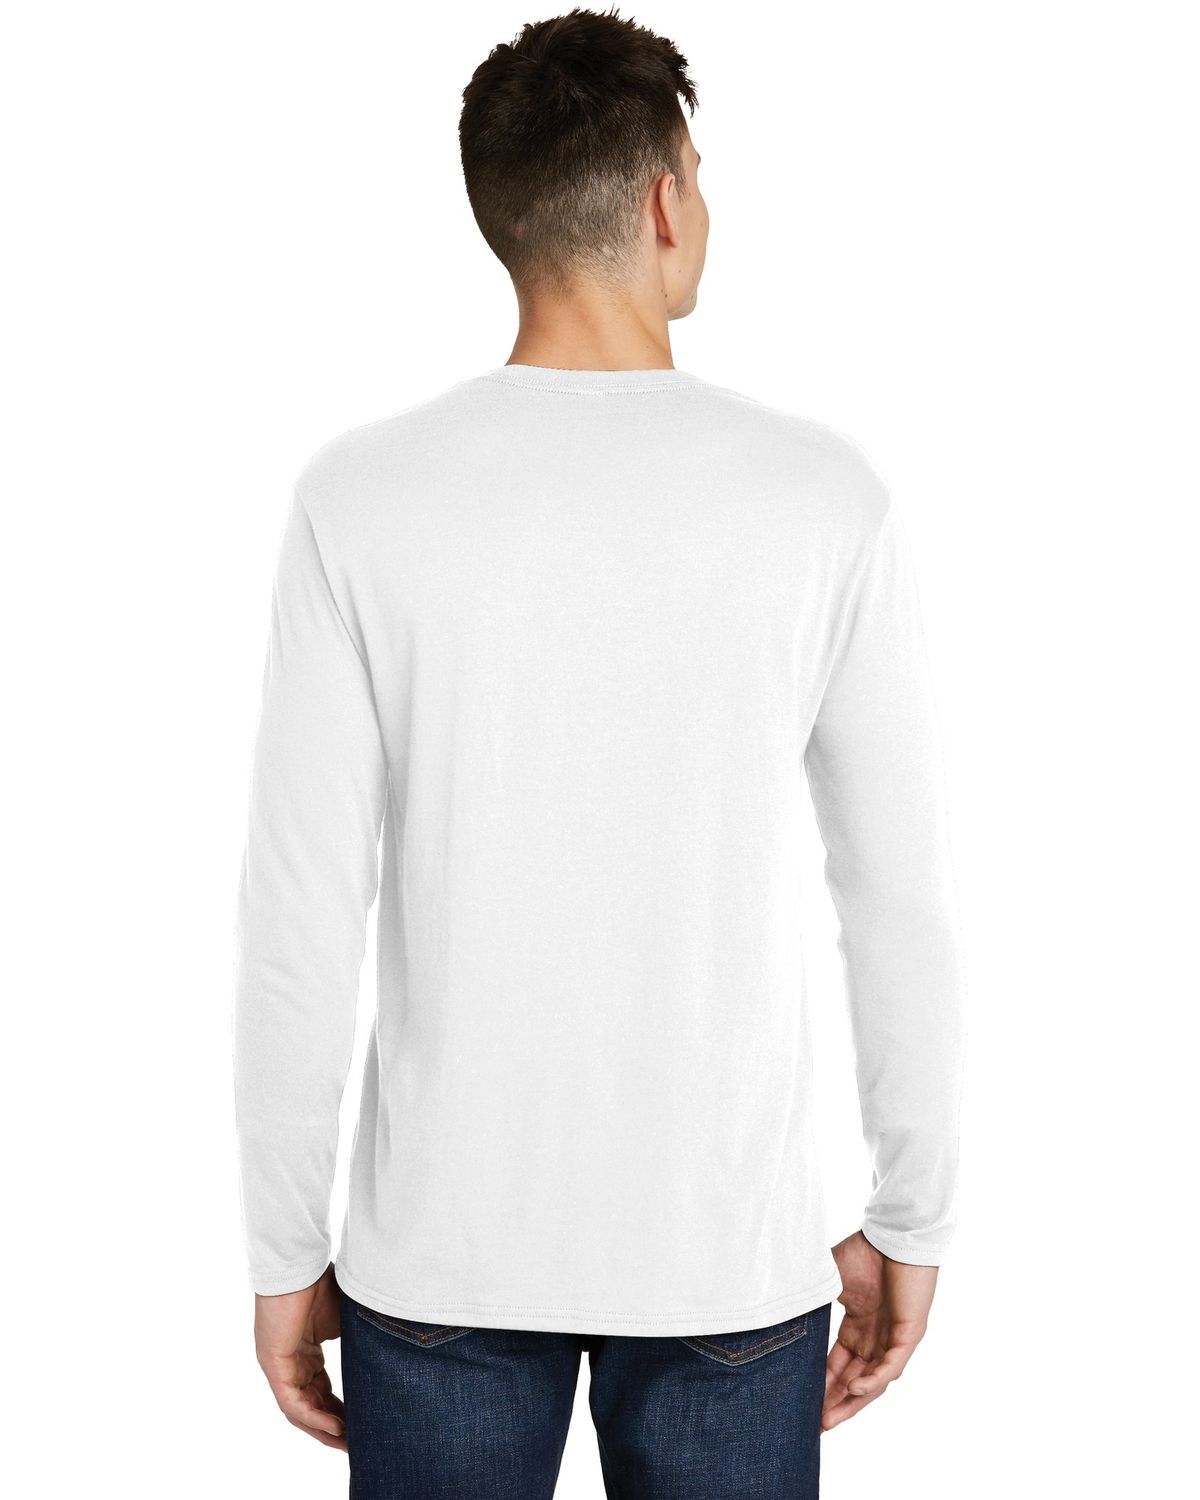 'District DT6200 Very Important Tee Long Sleeve'